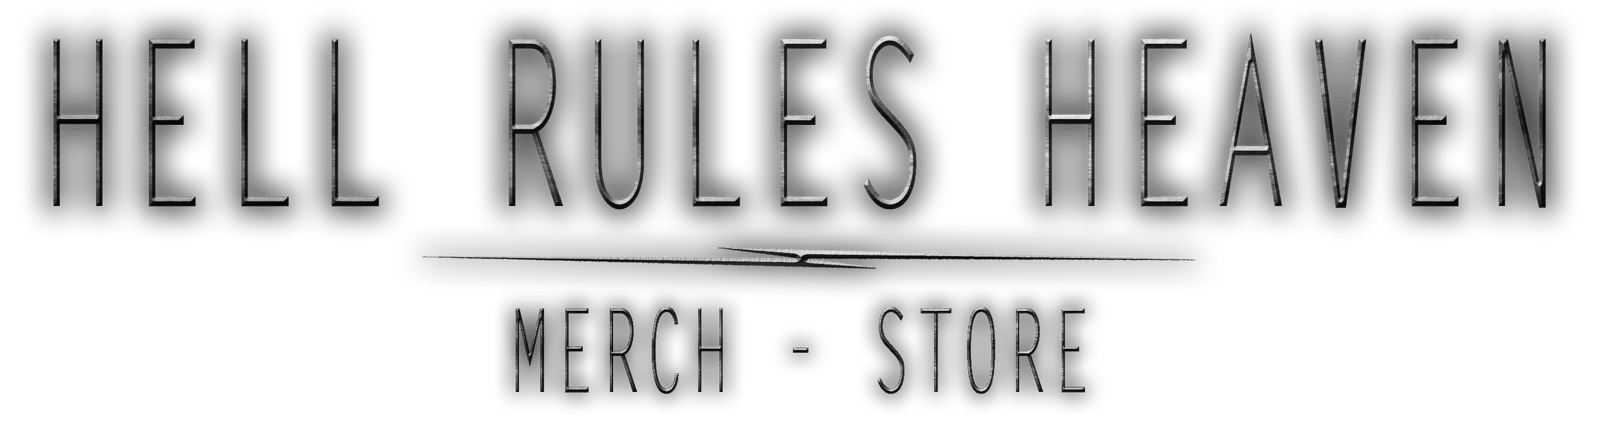 Hell Rules Heaven - Official Store